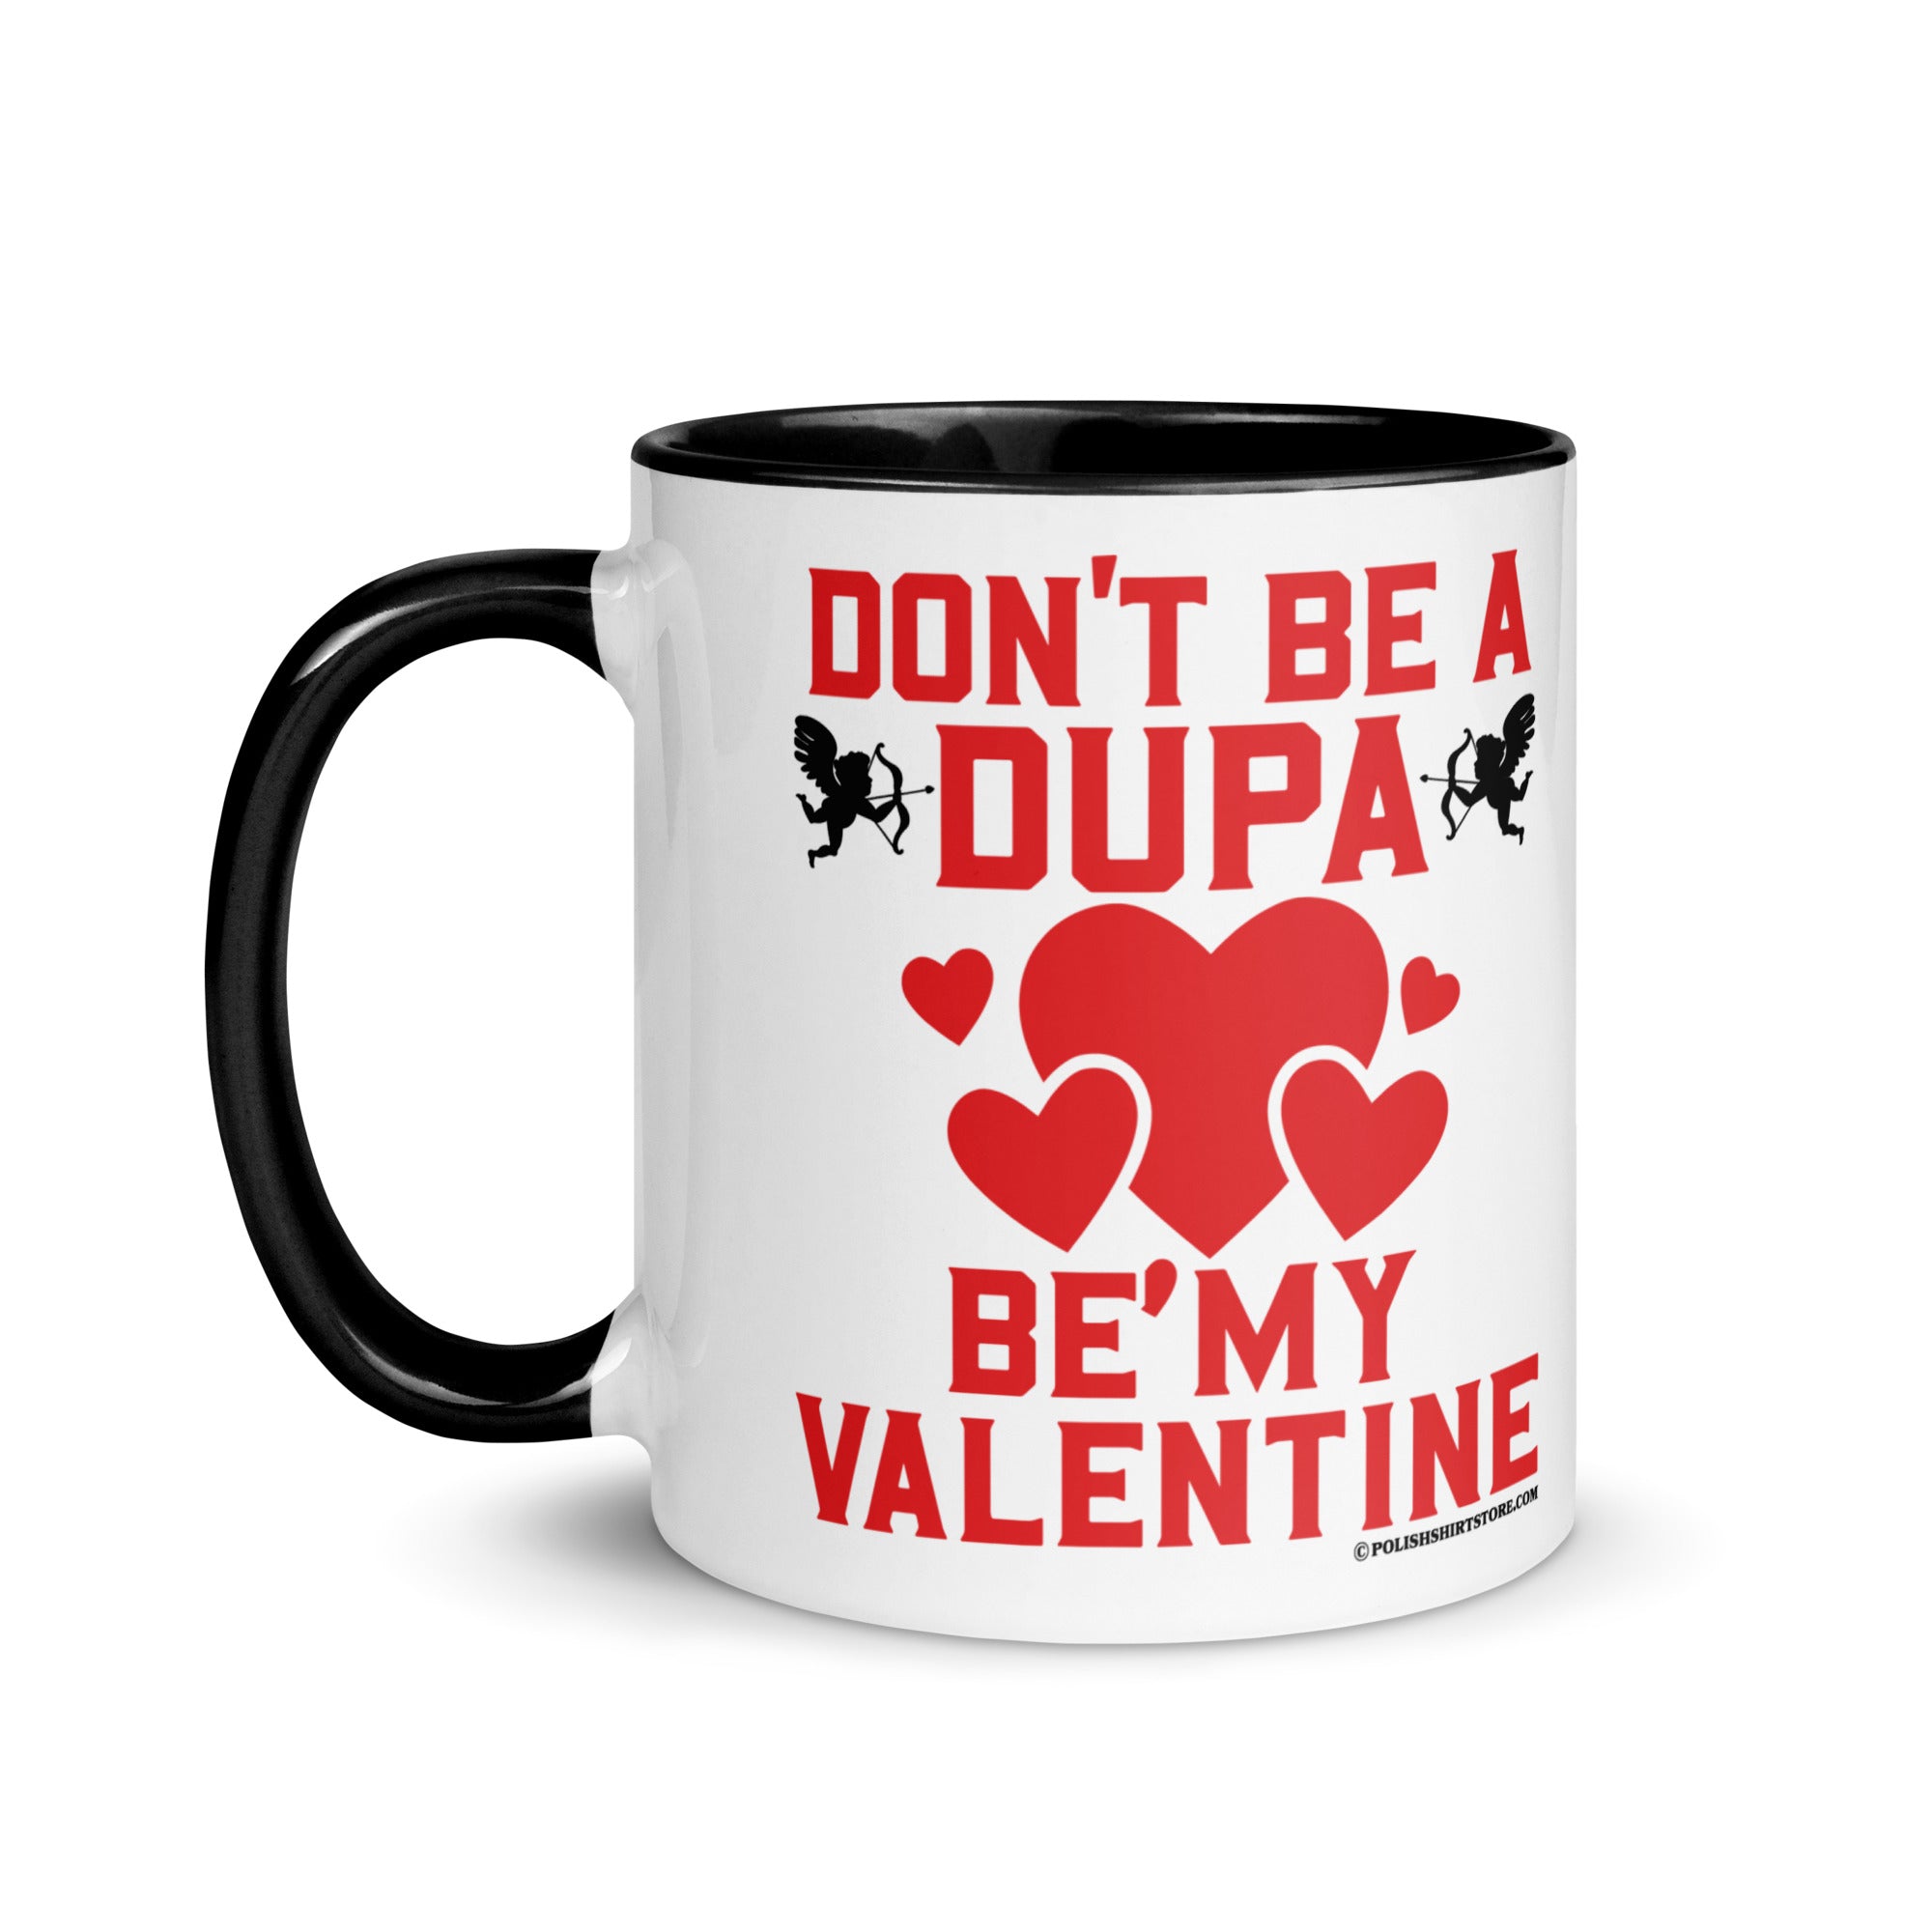 Don't Be A Dupa Be My Valentine Coffee Mug with Color Inside  Polish Shirt Store   